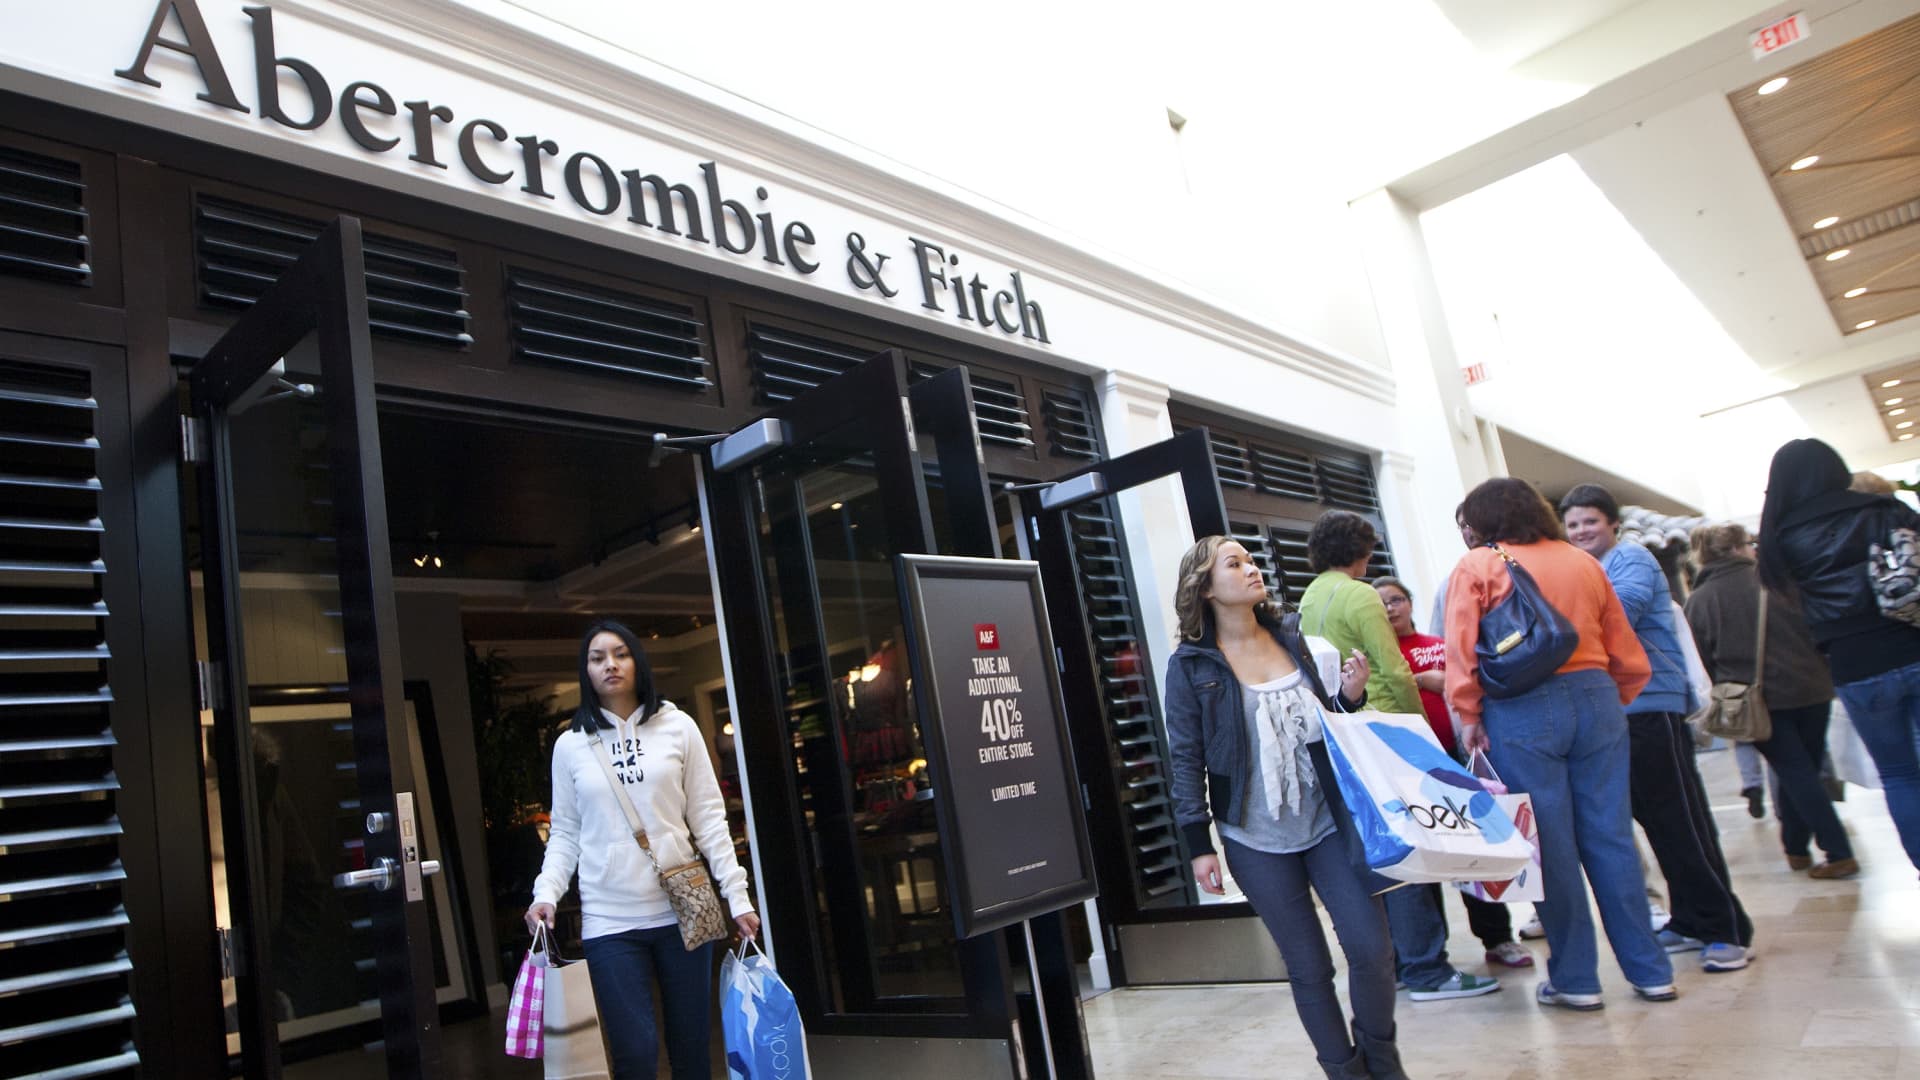 The Abercrombie & Fitch store at South Park mall in Charlotte, North Carolina.